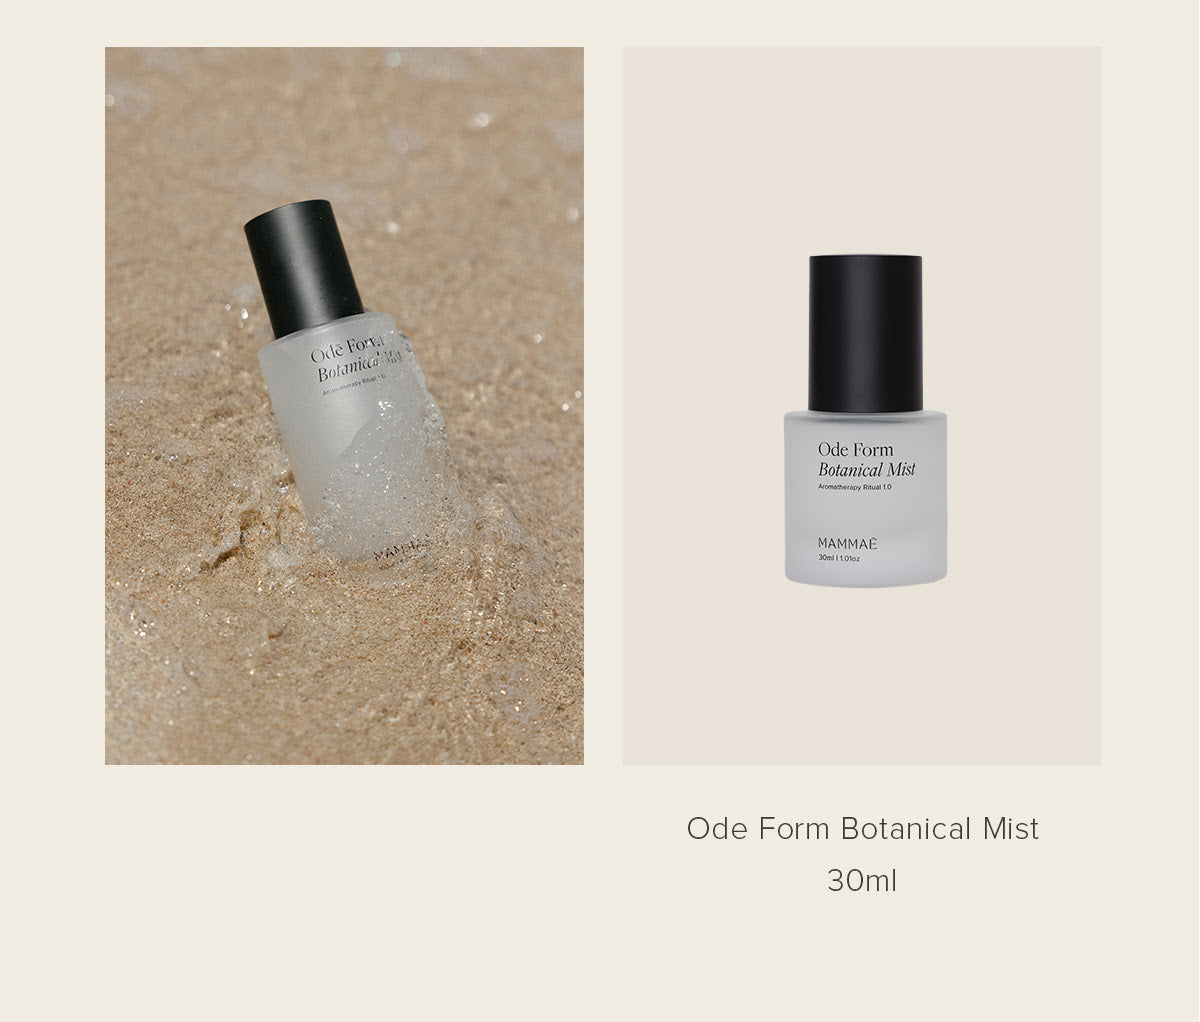 Mammae Ode Form Botanical Mist 100ml and 30ml Limited Edition Mini